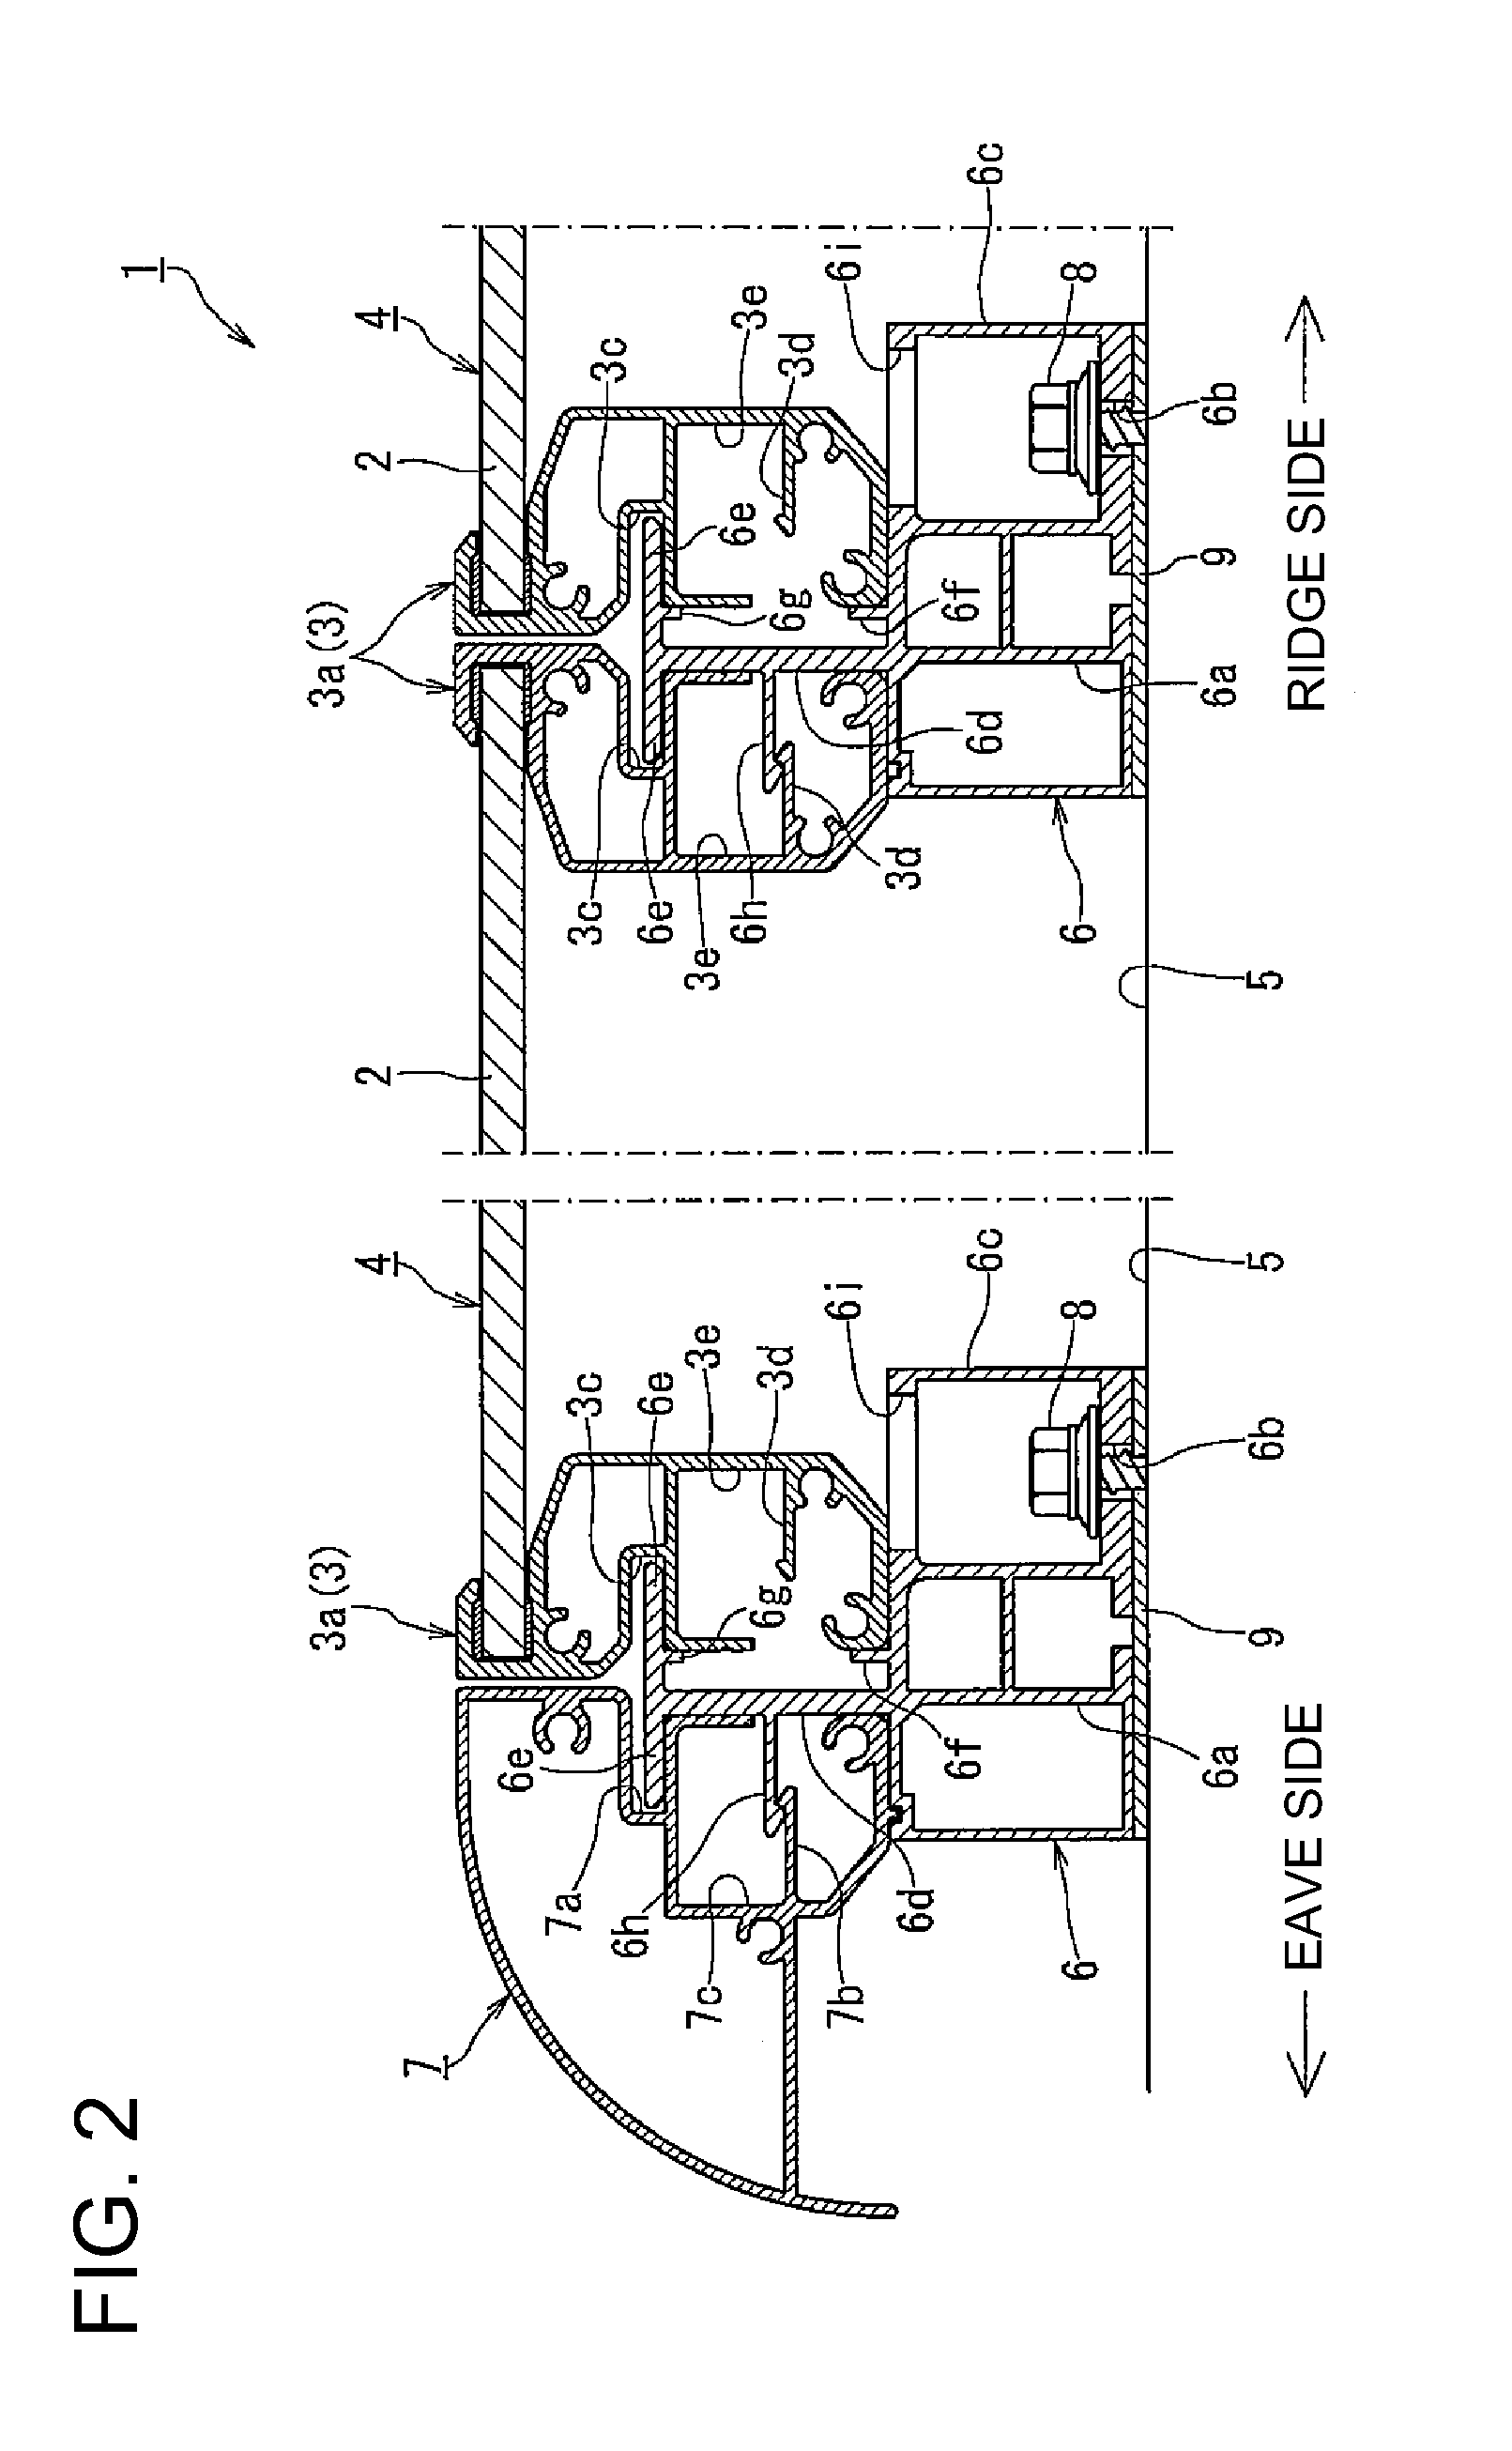 Connecting member for installing photovoltaic cell module